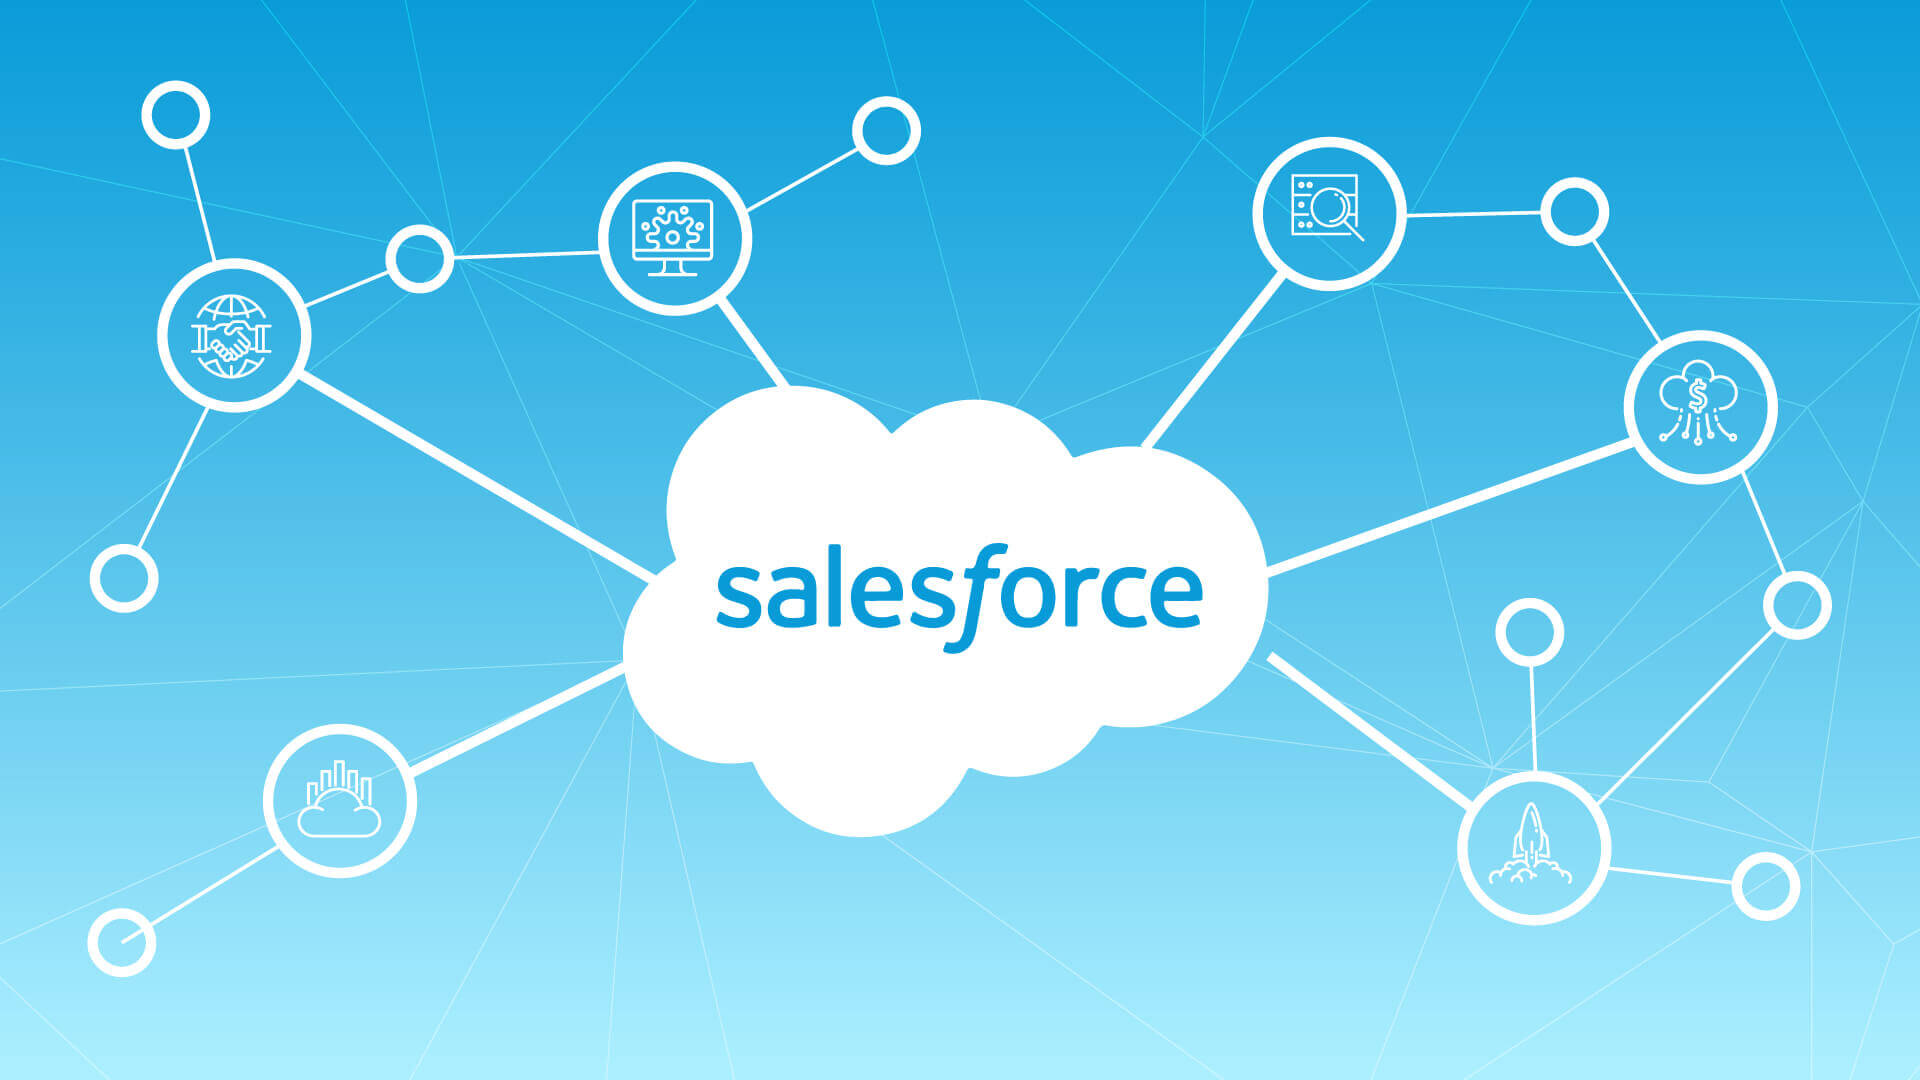 Featured image for “Salesforce Career Journey”